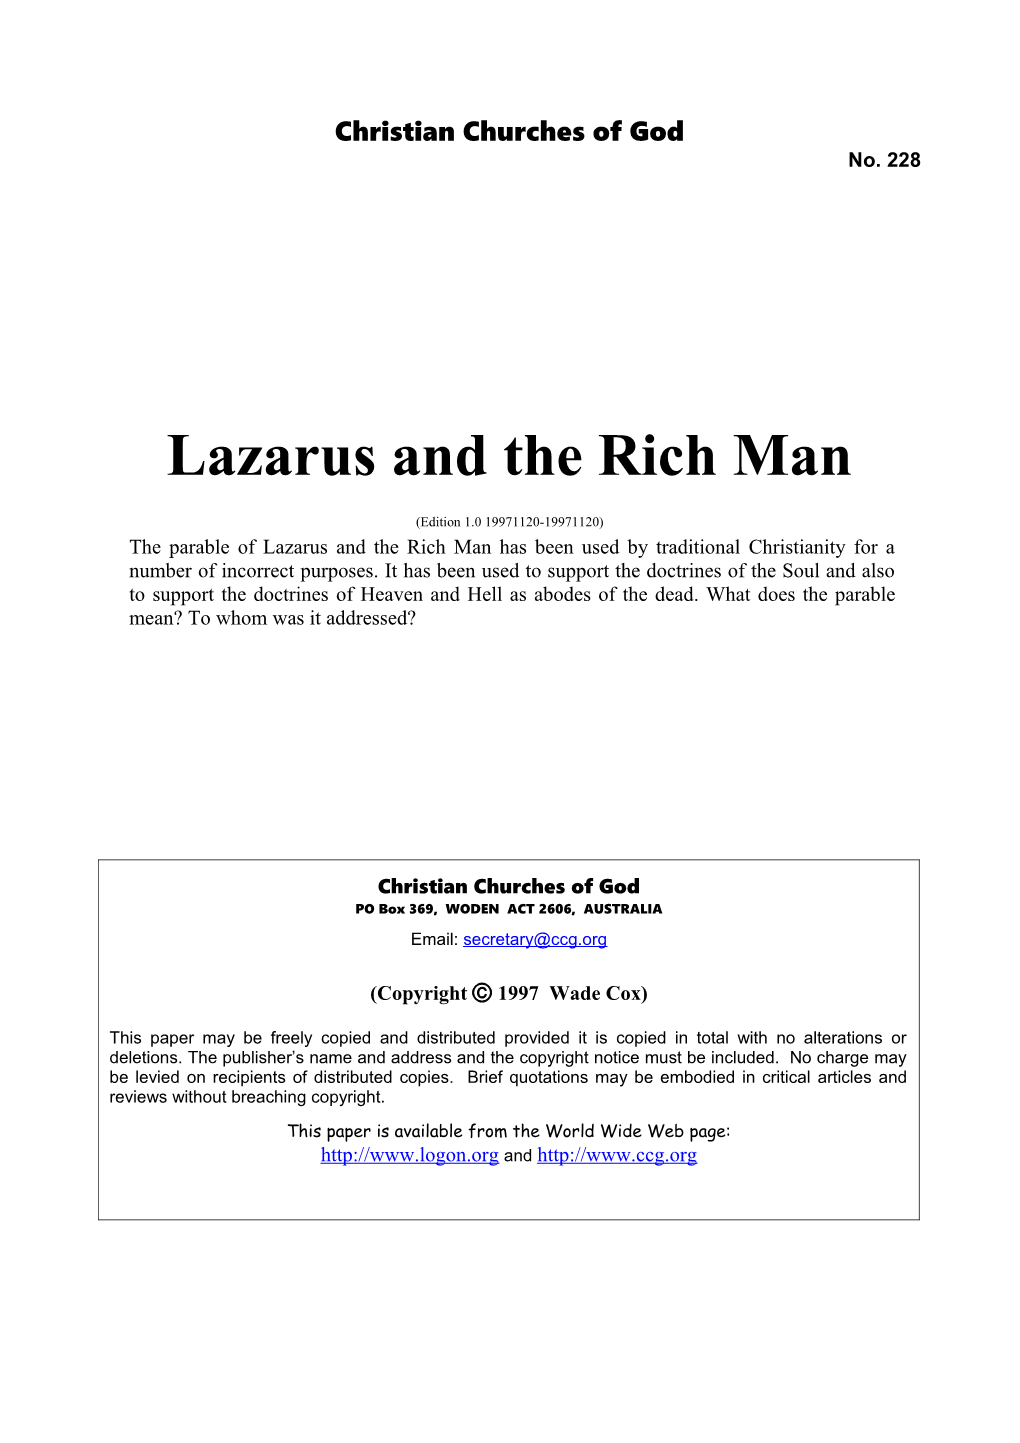 Lazarus and the Rich Man (No. 228)